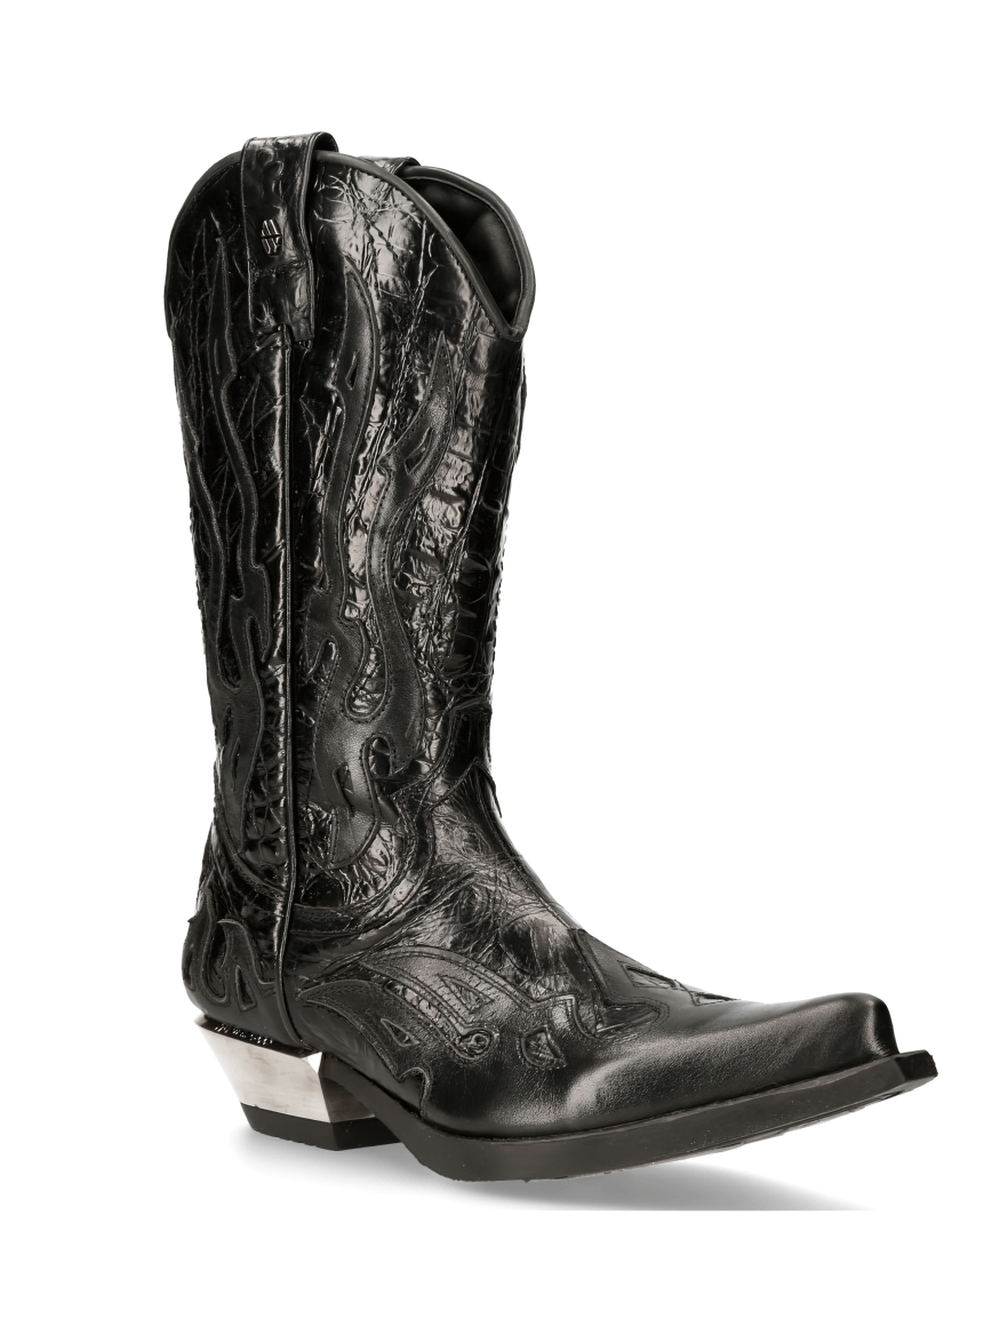 NEW ROCK Embossed Zippered Black Leather Cowboy Boots